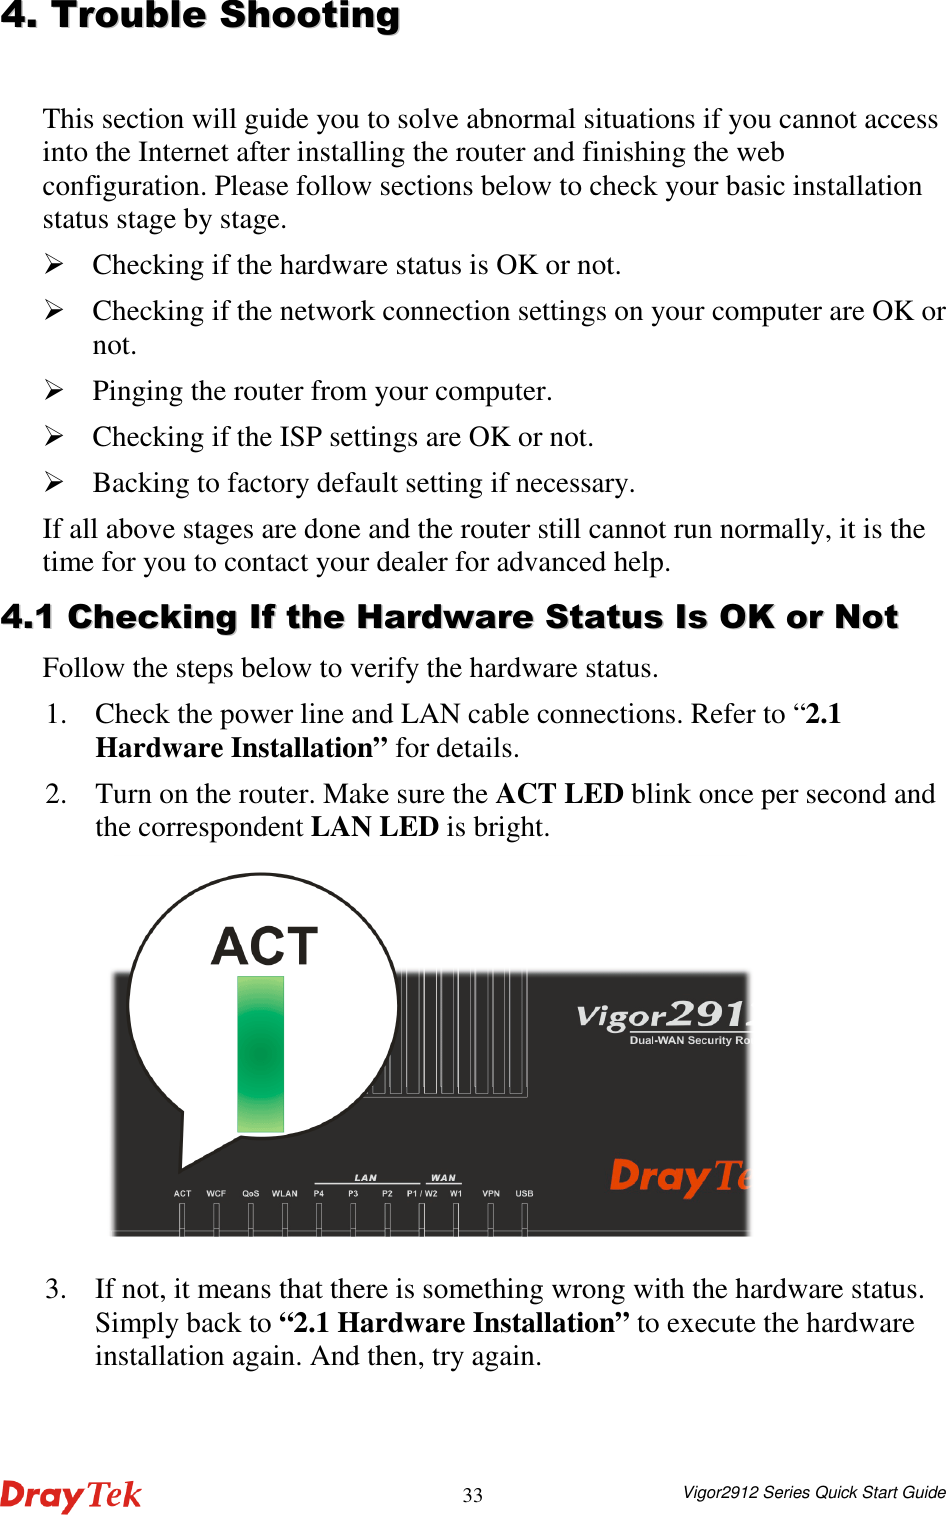  Vigor2912 Series Quick Start Guide 3344..  TTrroouubbllee  SShhoooottiinngg  This section will guide you to solve abnormal situations if you cannot access into the Internet after installing the router and finishing the web configuration. Please follow sections below to check your basic installation status stage by stage.  Checking if the hardware status is OK or not.  Checking if the network connection settings on your computer are OK or not.  Pinging the router from your computer.  Checking if the ISP settings are OK or not.  Backing to factory default setting if necessary. If all above stages are done and the router still cannot run normally, it is the time for you to contact your dealer for advanced help. 44..11  CChheecckkiinngg  IIff  tthhee  HHaarrddwwaarree  SSttaattuuss  IIss  OOKK  oorr  NNoott  Follow the steps below to verify the hardware status. 1. Check the power line and LAN cable connections. Refer to “2.1 Hardware Installation” for details.   2. Turn on the router. Make sure the ACT LED blink once per second and the correspondent LAN LED is bright.  3. If not, it means that there is something wrong with the hardware status. Simply back to “2.1 Hardware Installation” to execute the hardware installation again. And then, try again. 